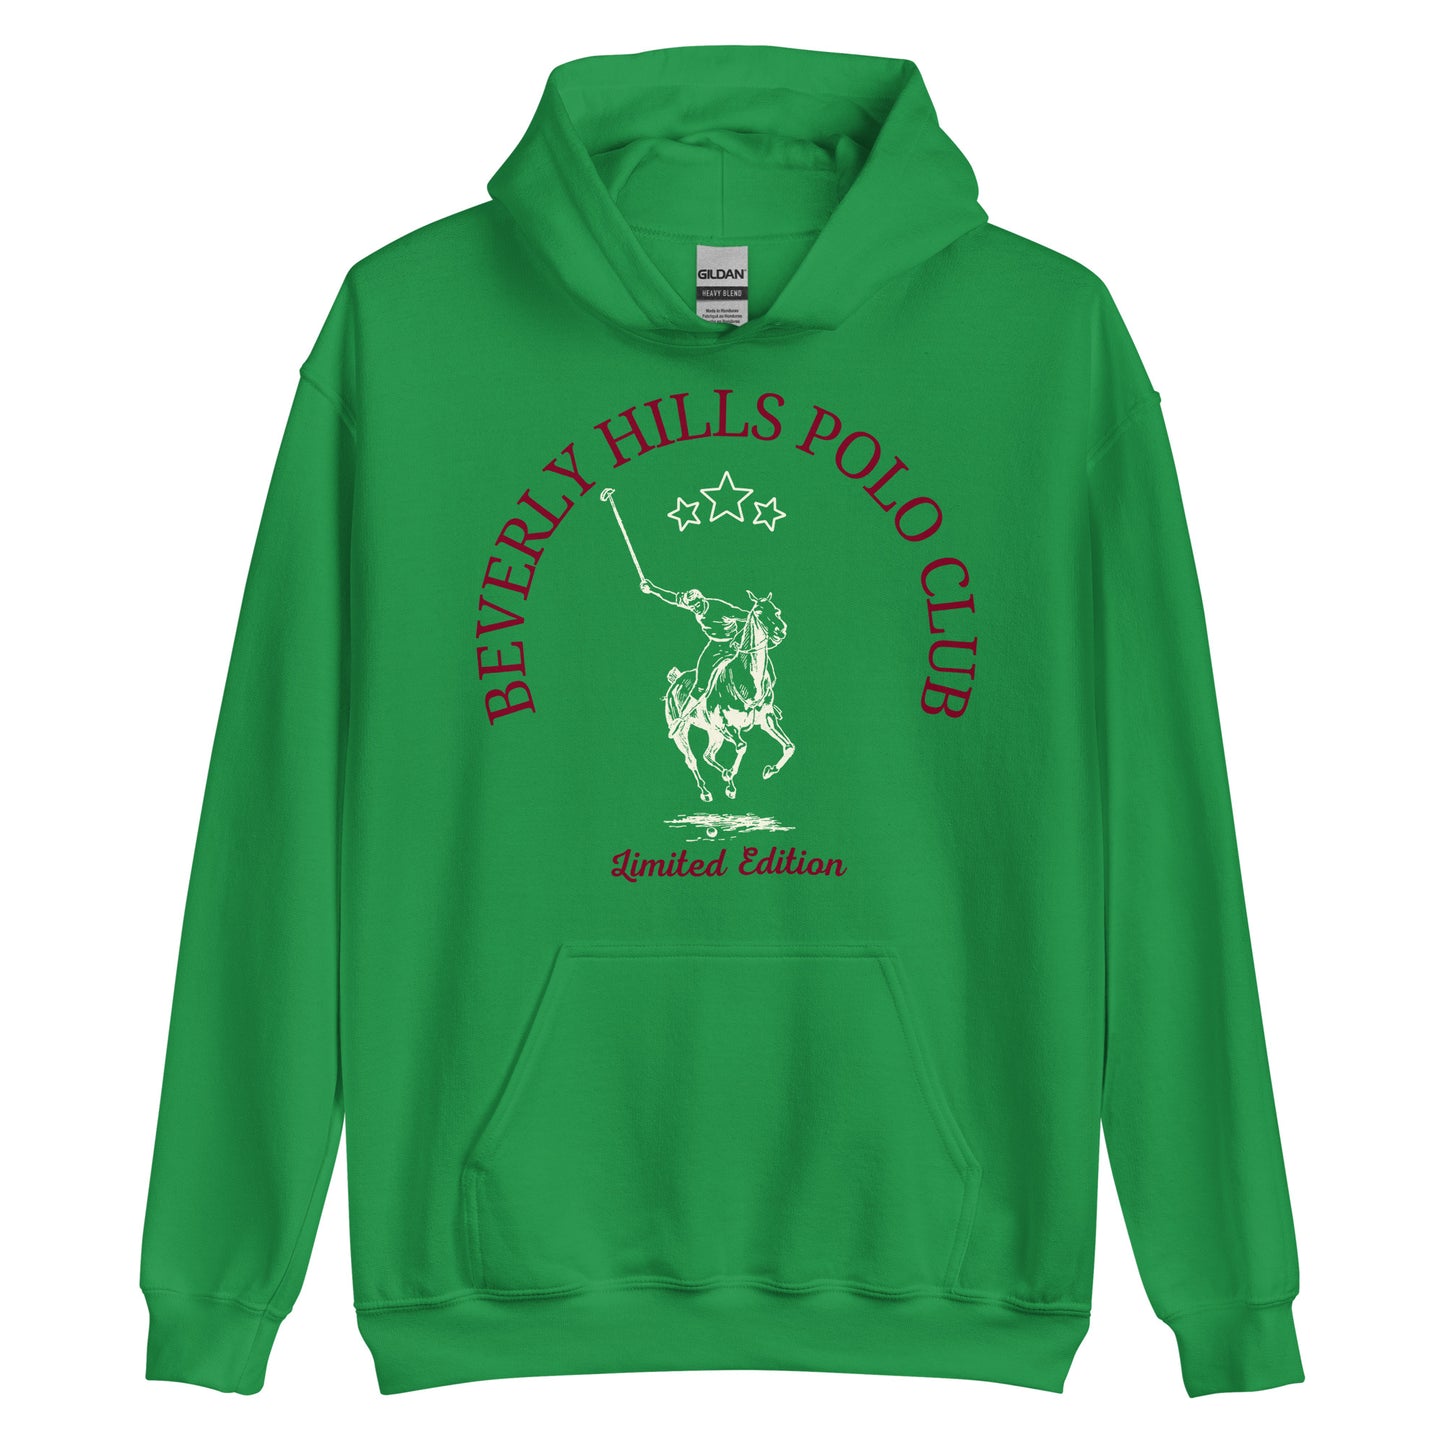 A Green hoodie features the 'Beverly Hills Polo Club' logo with a white illustration of a polo player on horseback, accompanied by three white stars above and the words 'Limited Edition' below. The design is centered on the chest of the hoodie, which has a front pouch pocket and is displayed on a plain background.